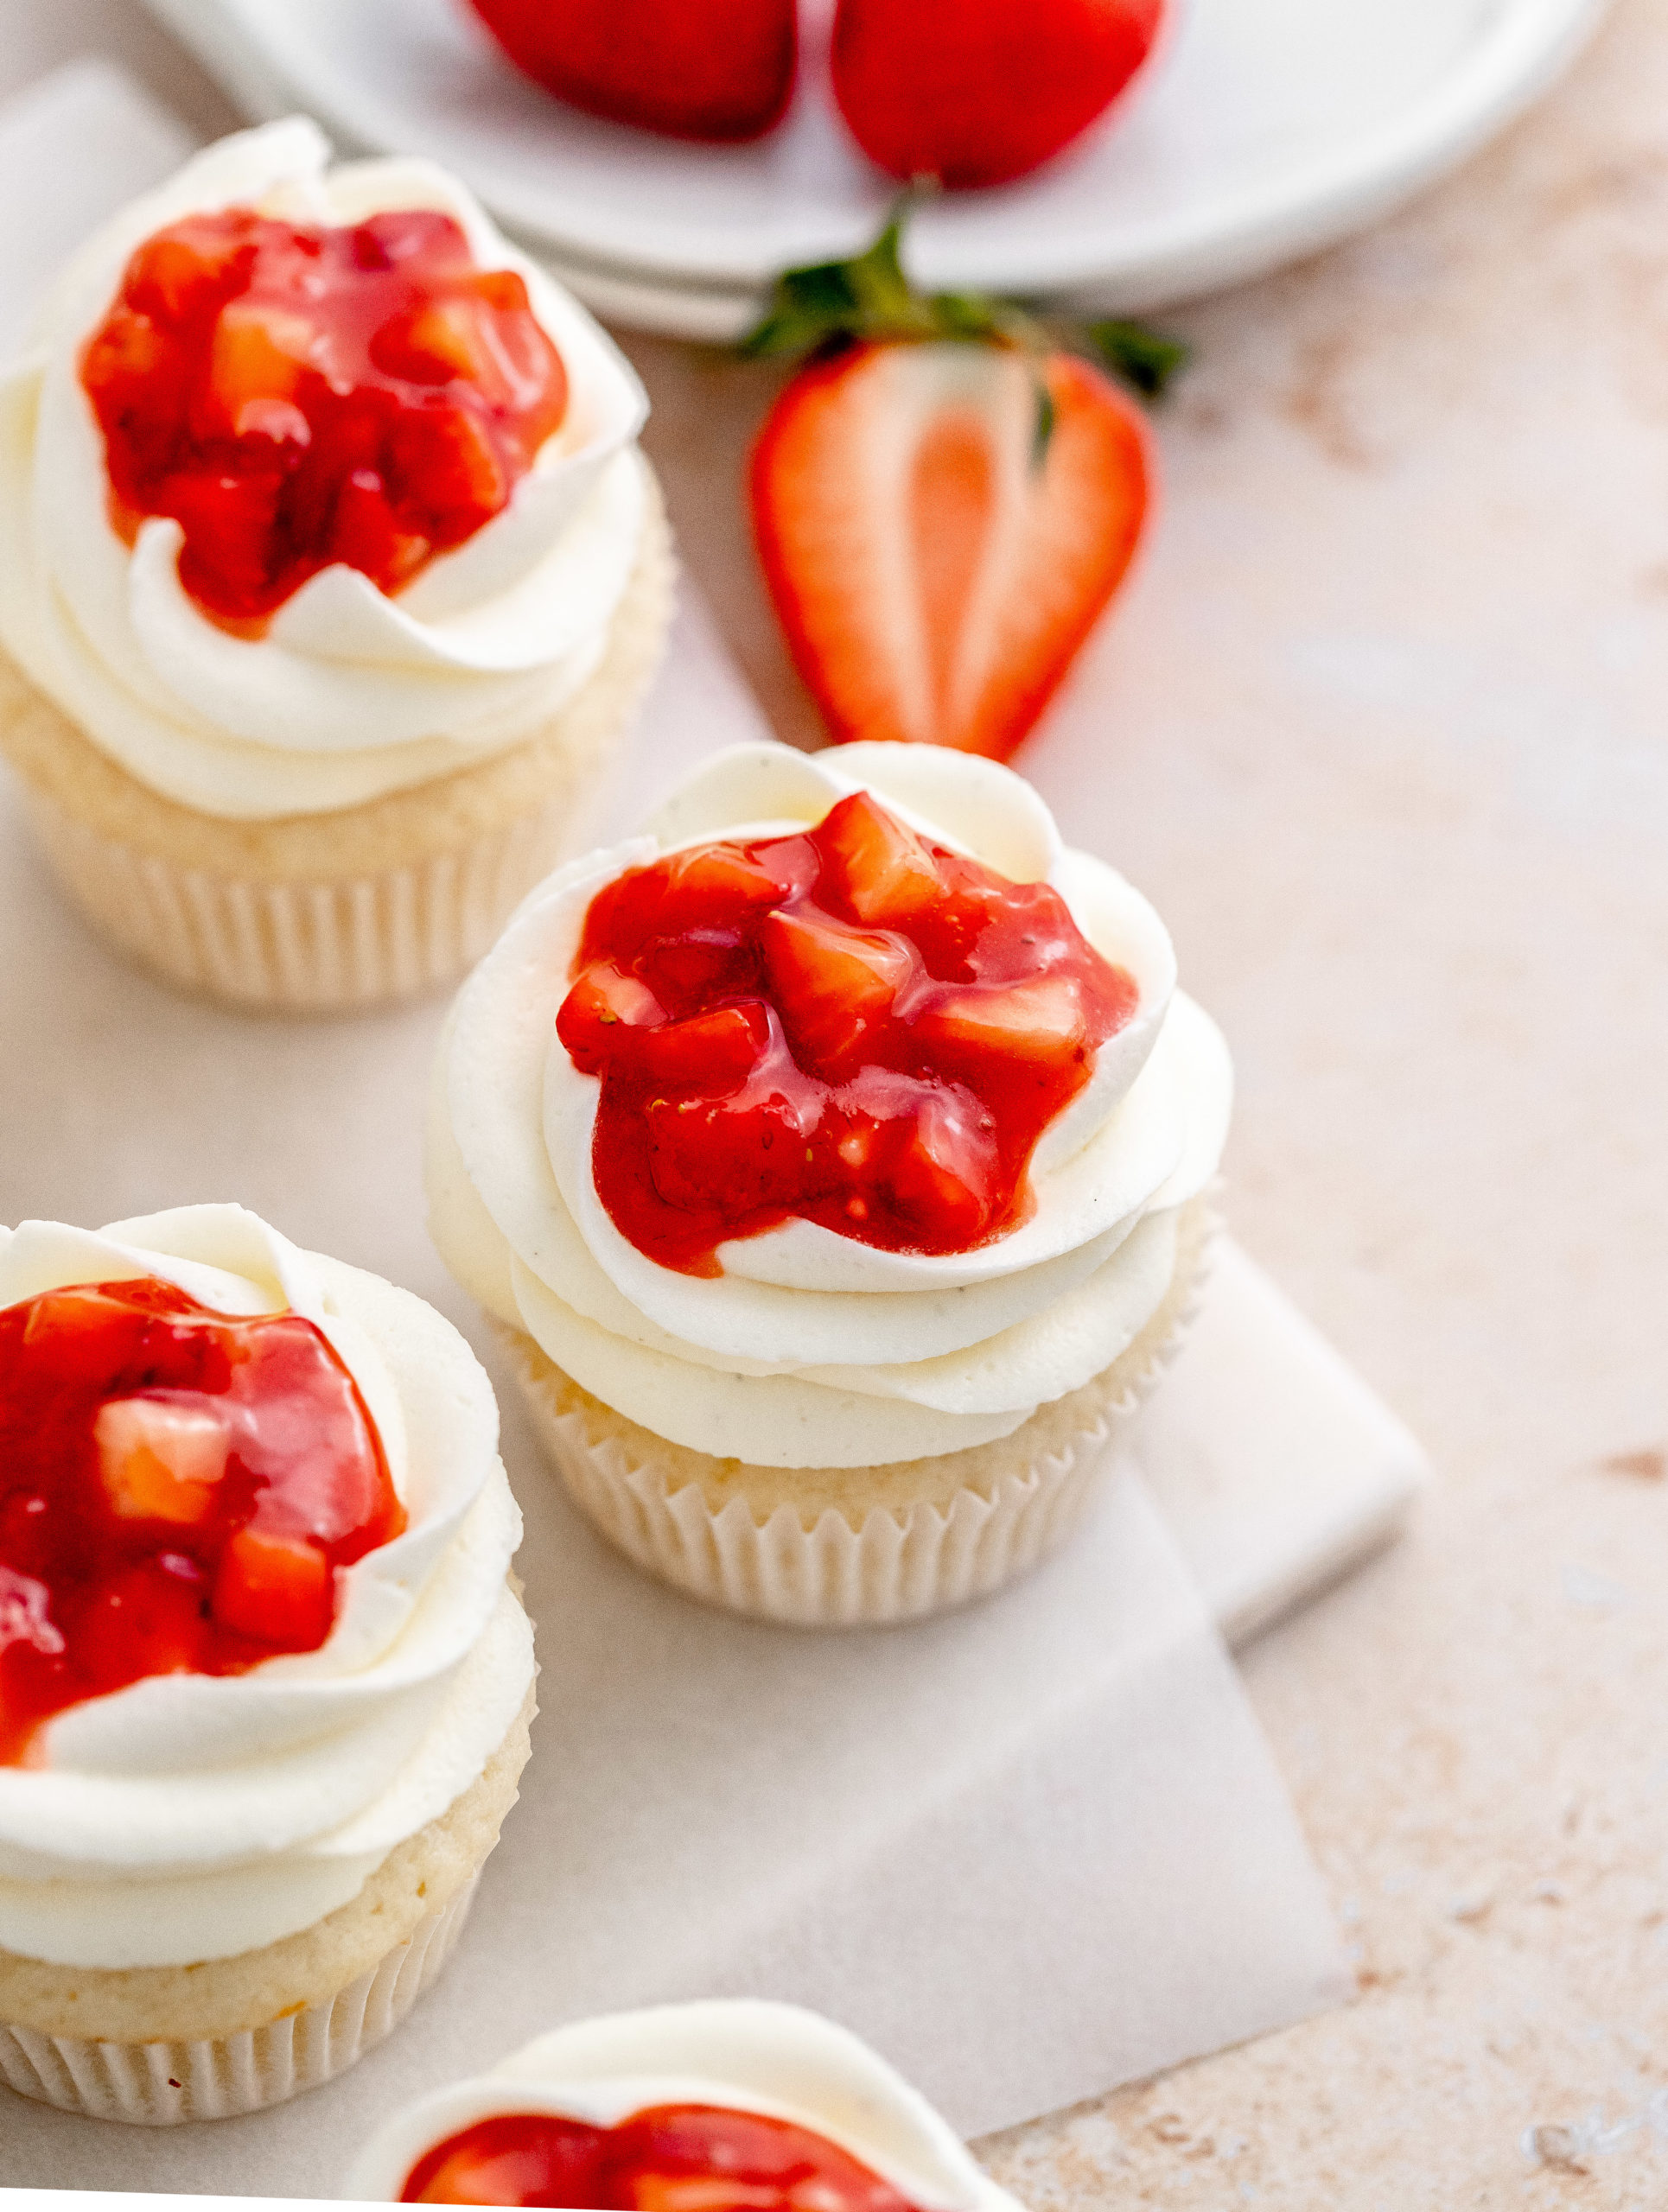 https://juliemarieeats.com/wp-content/uploads/2023/03/Strawberry-filled-cupcakes-15-scaled.jpg